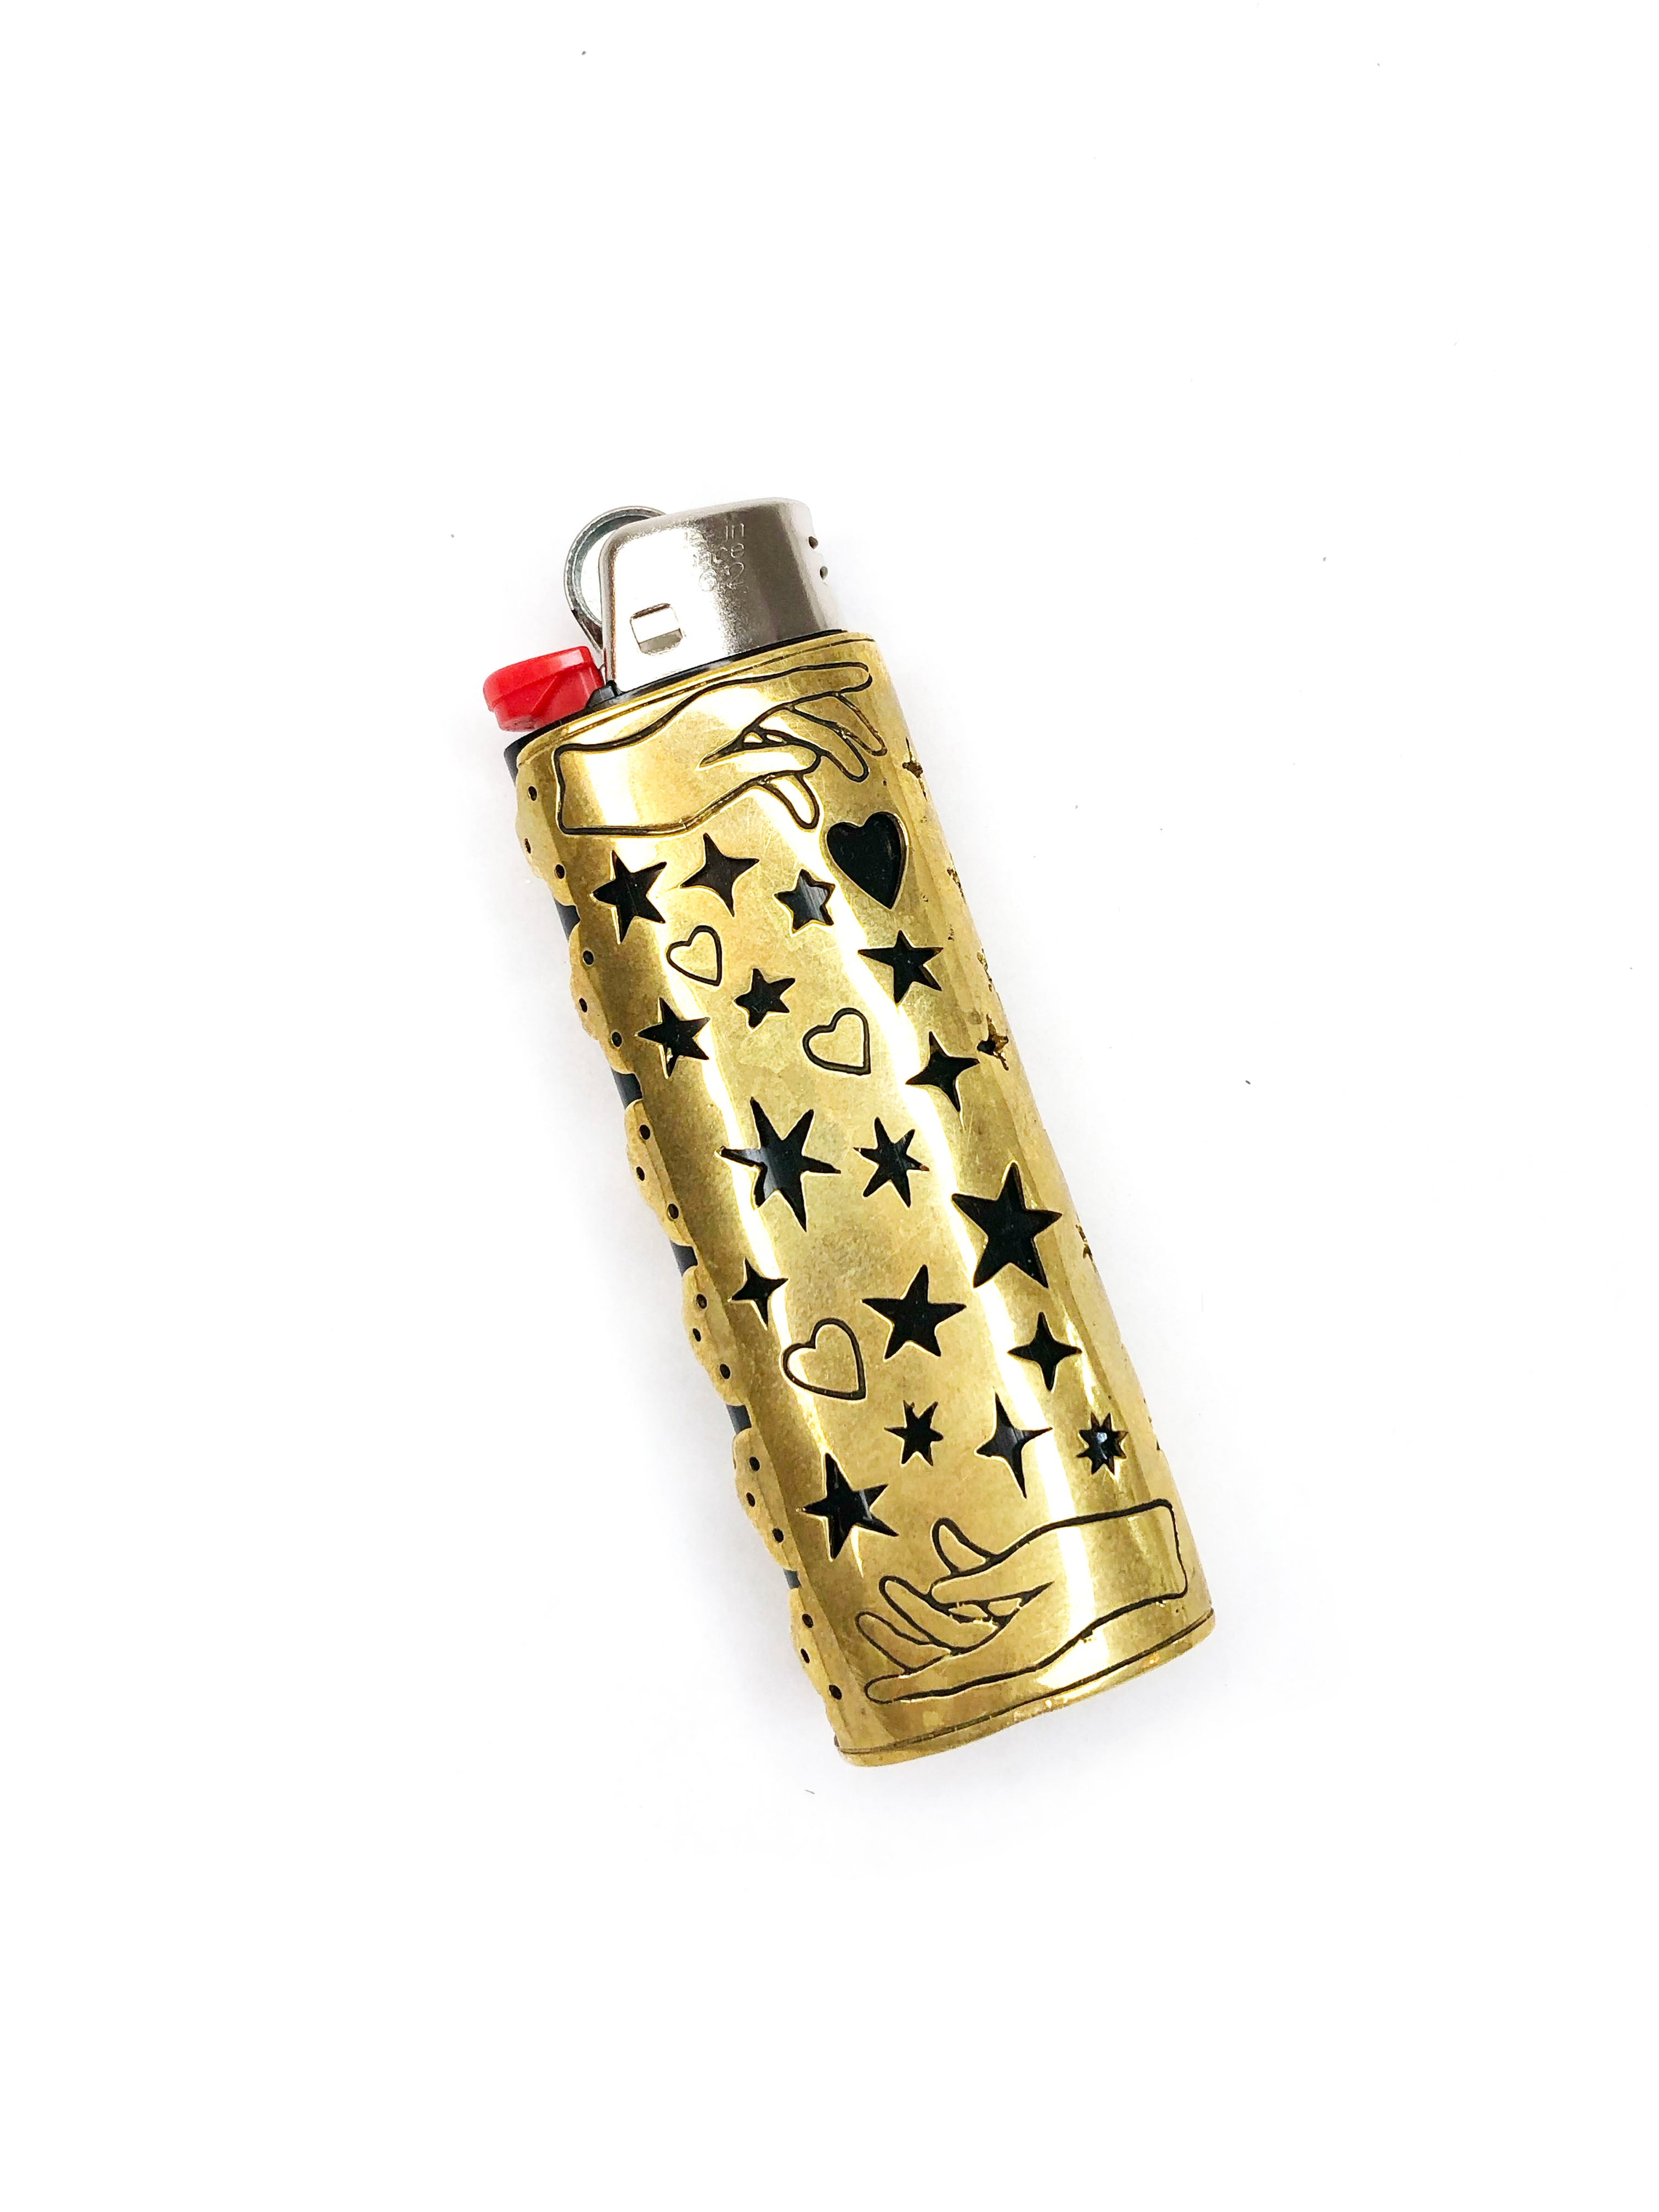 brass lighter sleeve with celestial star and heart images to use with BIC lighter 